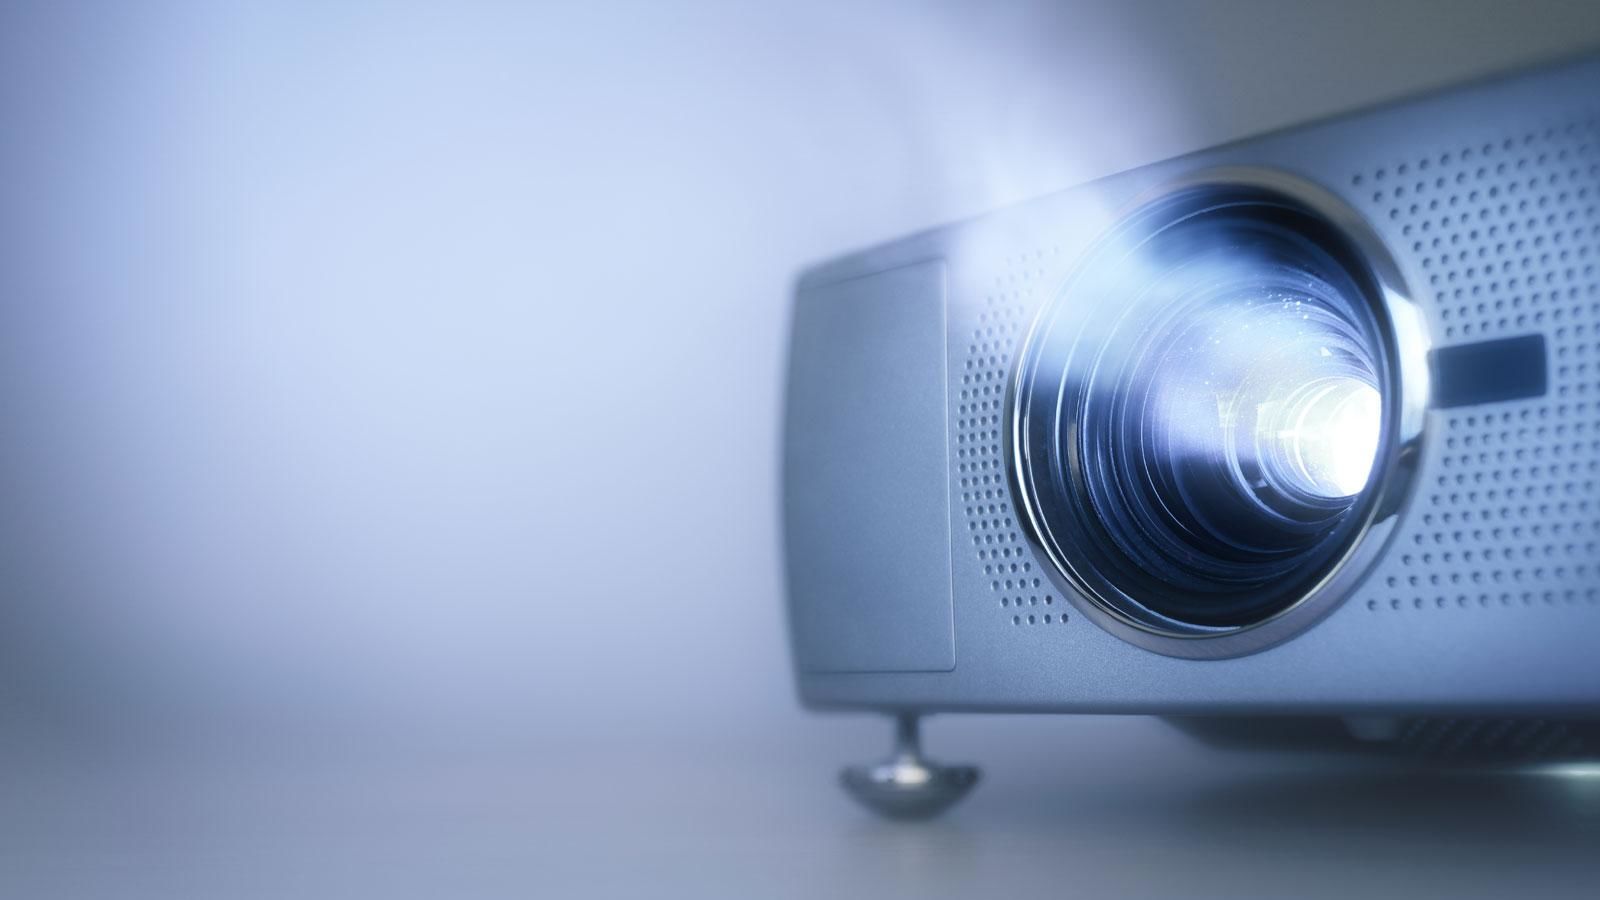 Global High-Definition Ultra-Short Throw (UST) Projectors Market: Trends, Dynamics, and Future Outlook